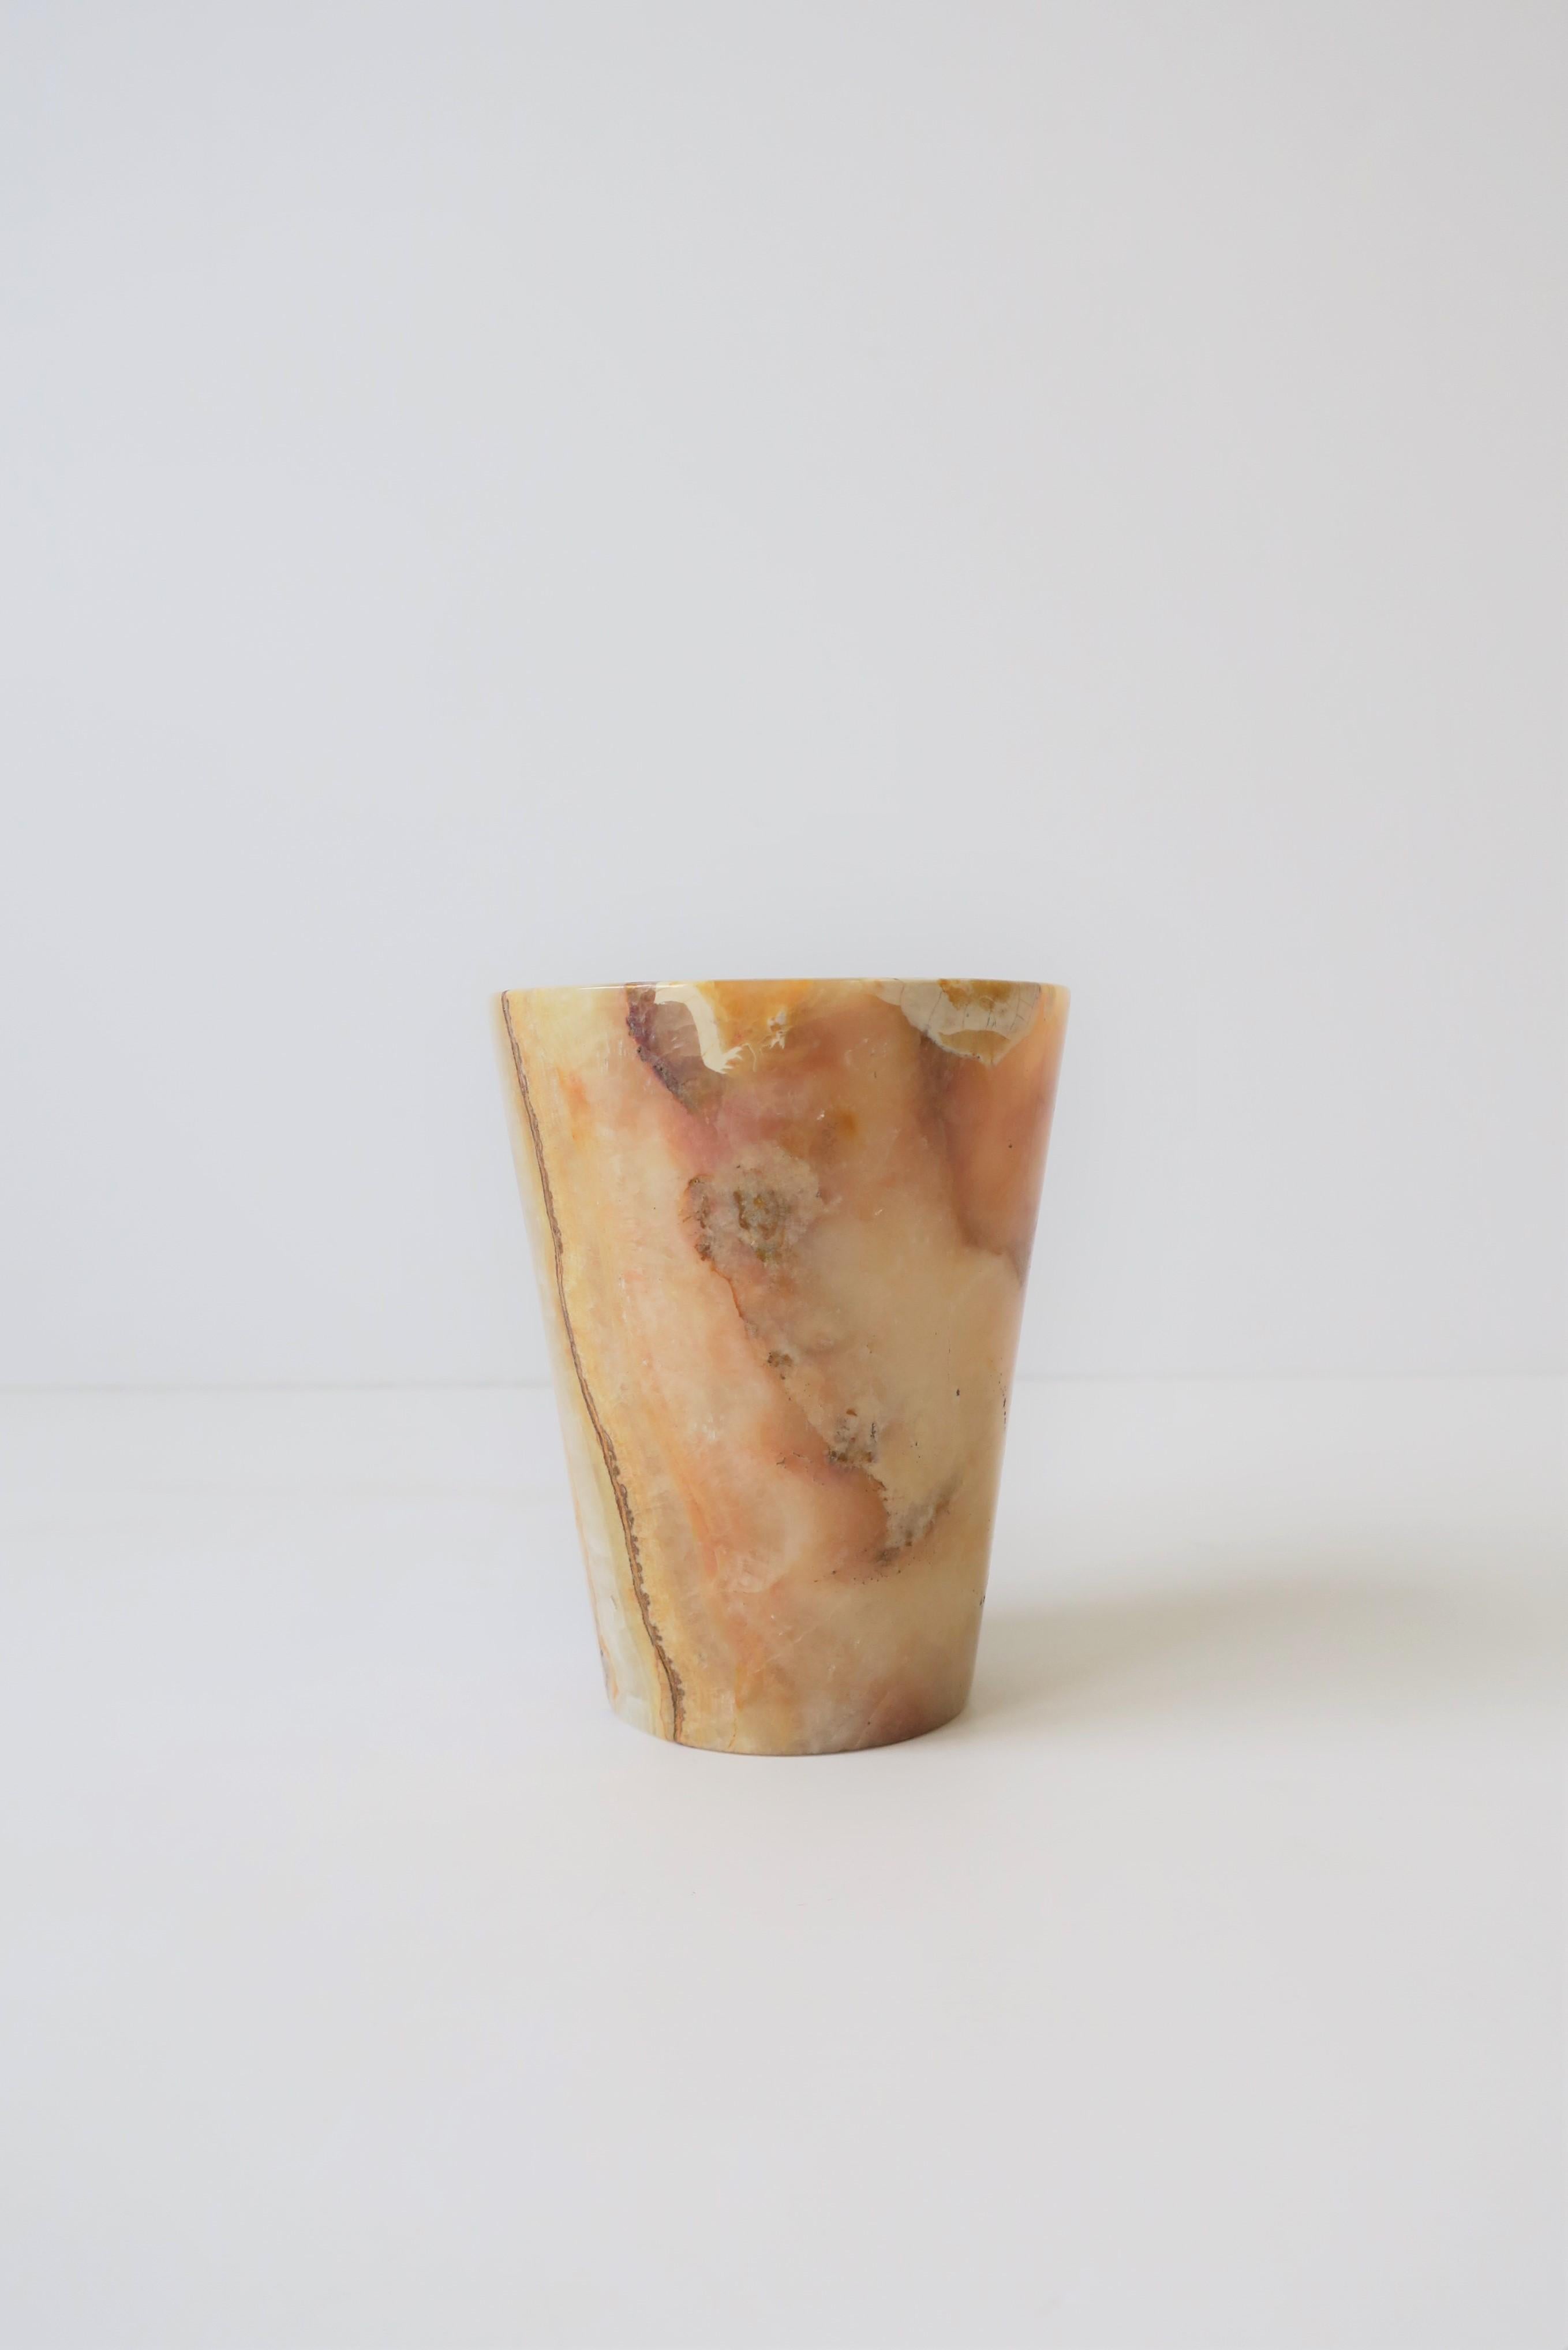 20th Century Onyx Cup or Vessel